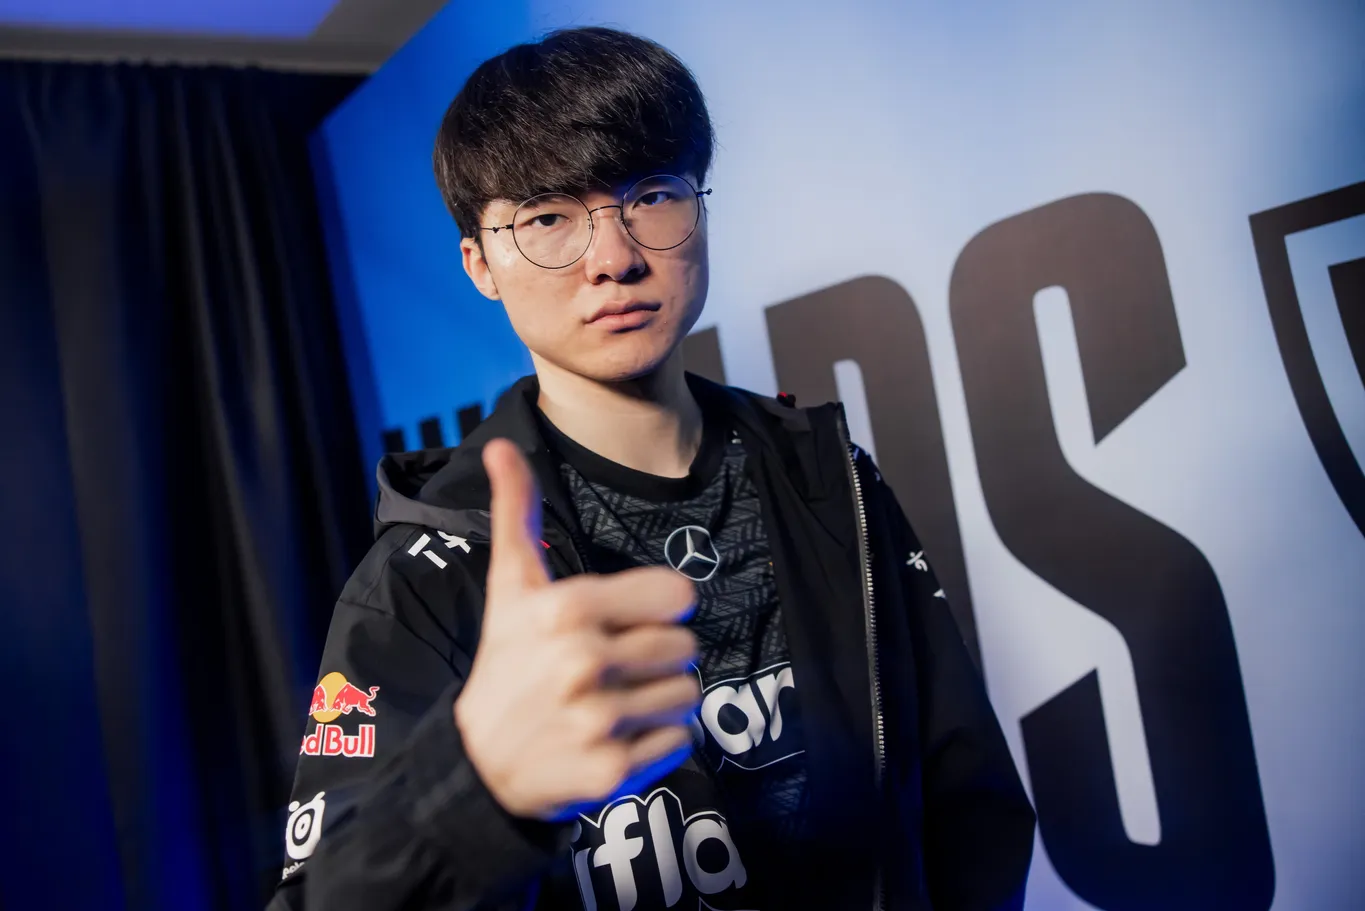 League of Legends the World Championship 2021 semifinal schedule: LOL Worlds  semifinalists and match days - The SportsRush